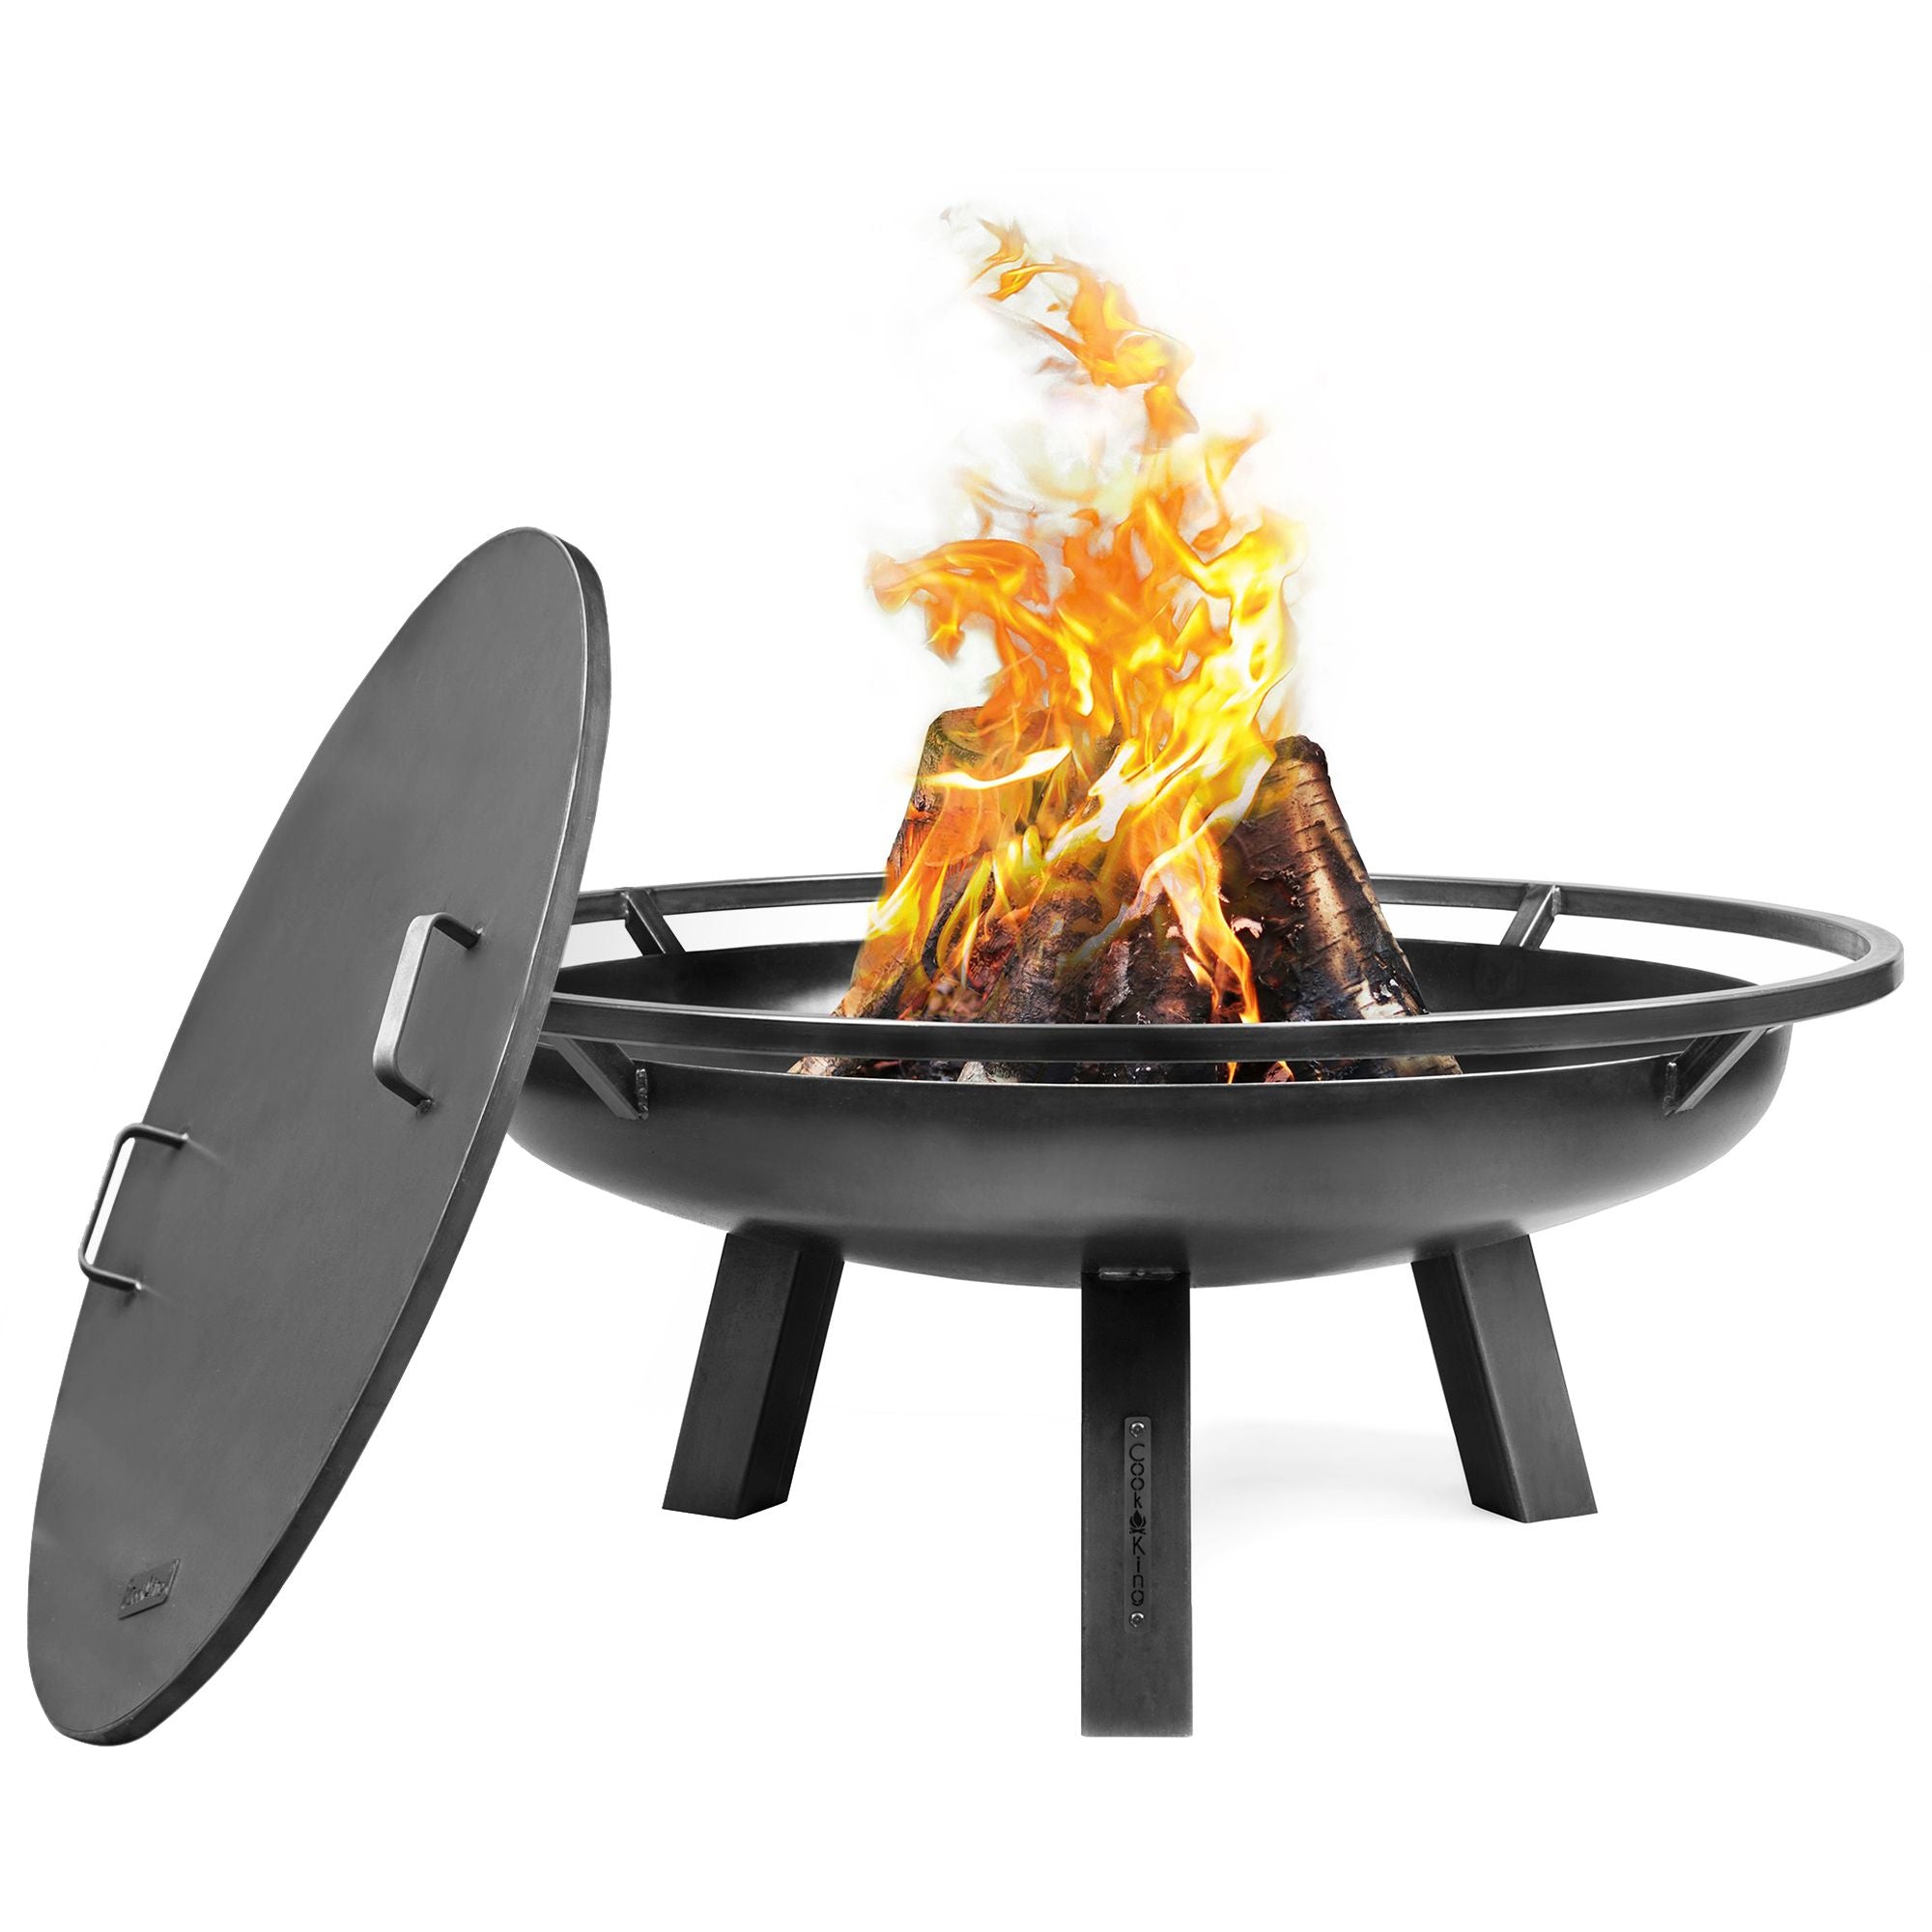 Ember 24" Fire Pit with Cover Lid - Good Directions